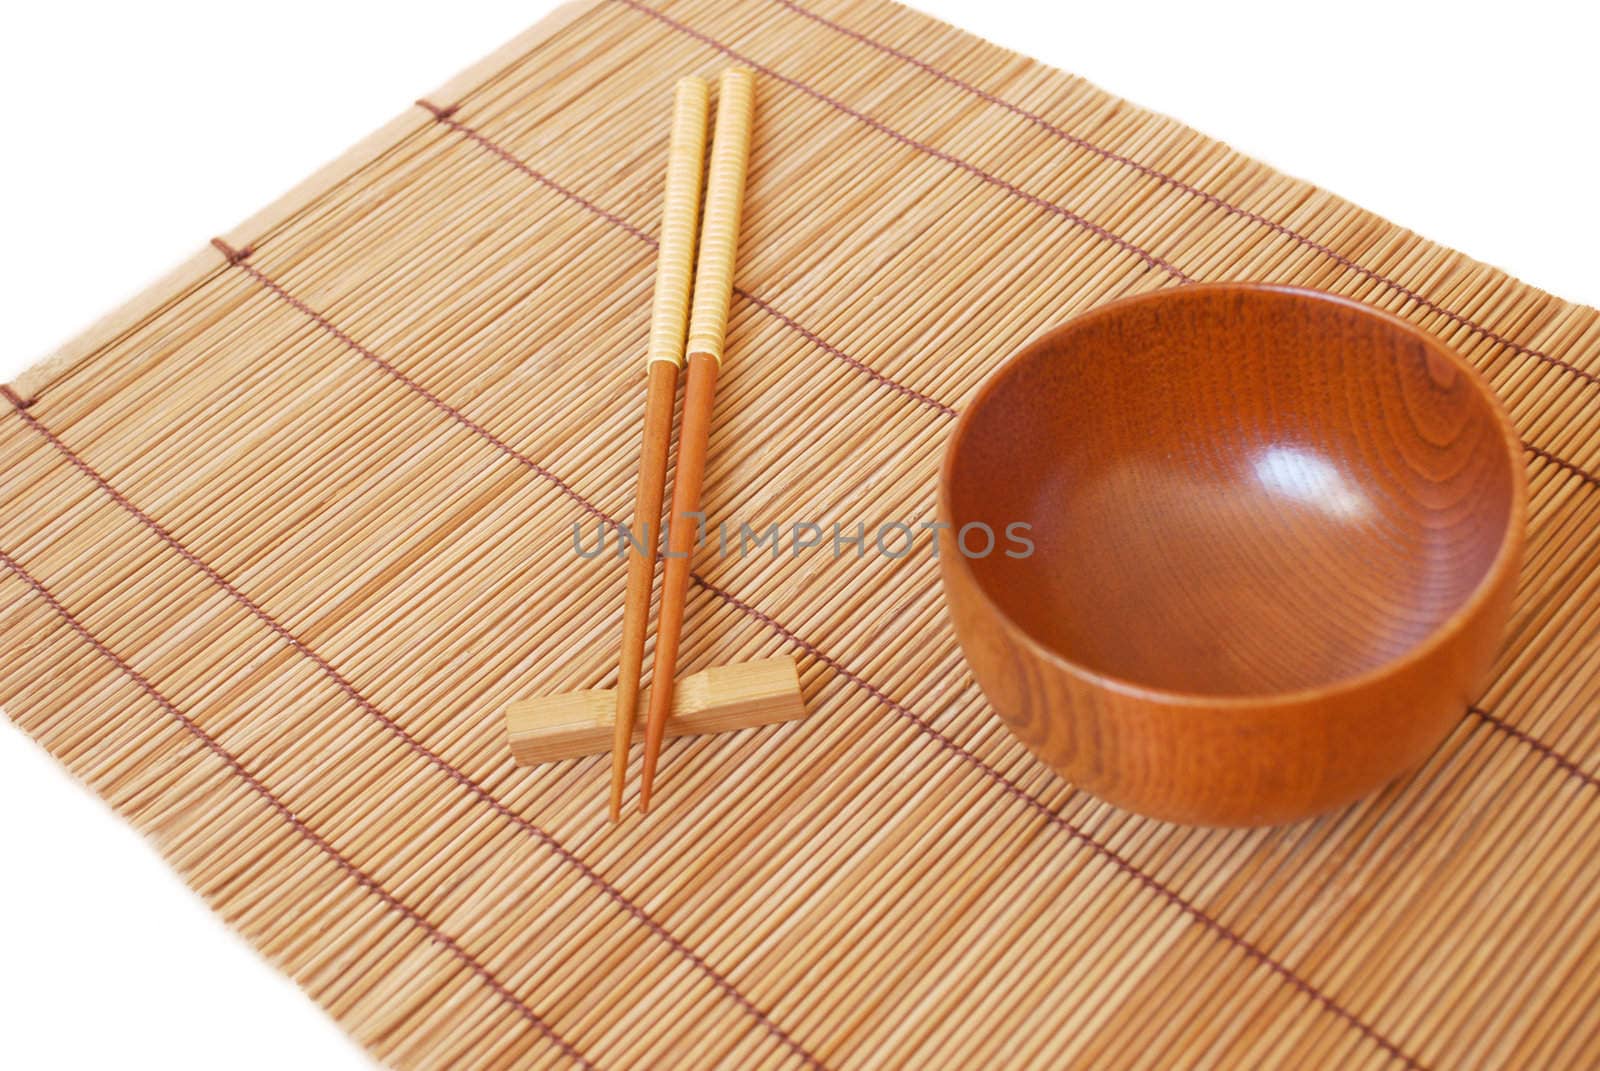 Chopsticks with wooden bowl on bamboo matting background  by svtrotof